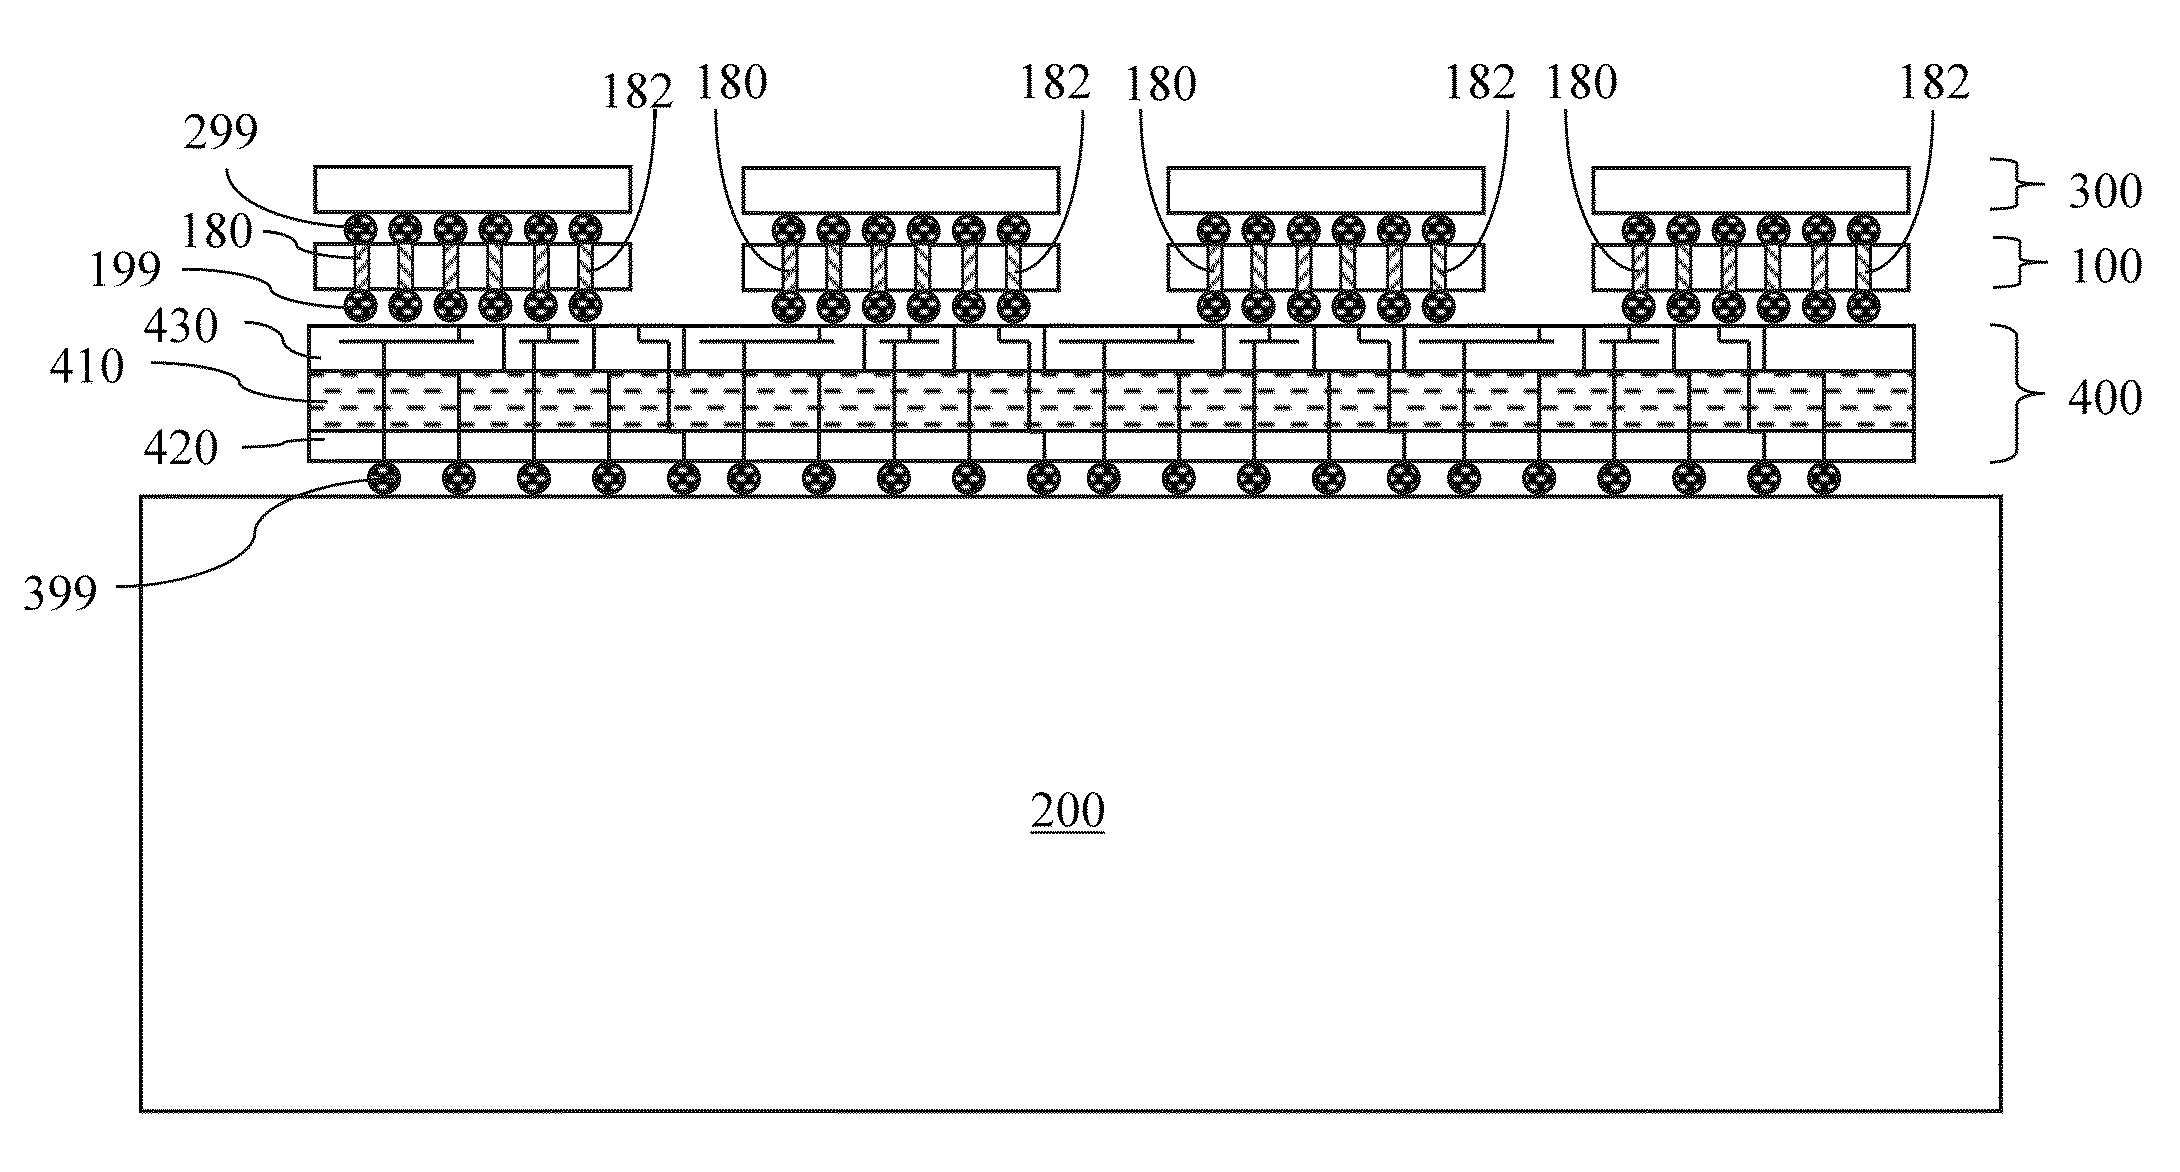 Integrated decoupling capacitor employing conductive through-substrate vias